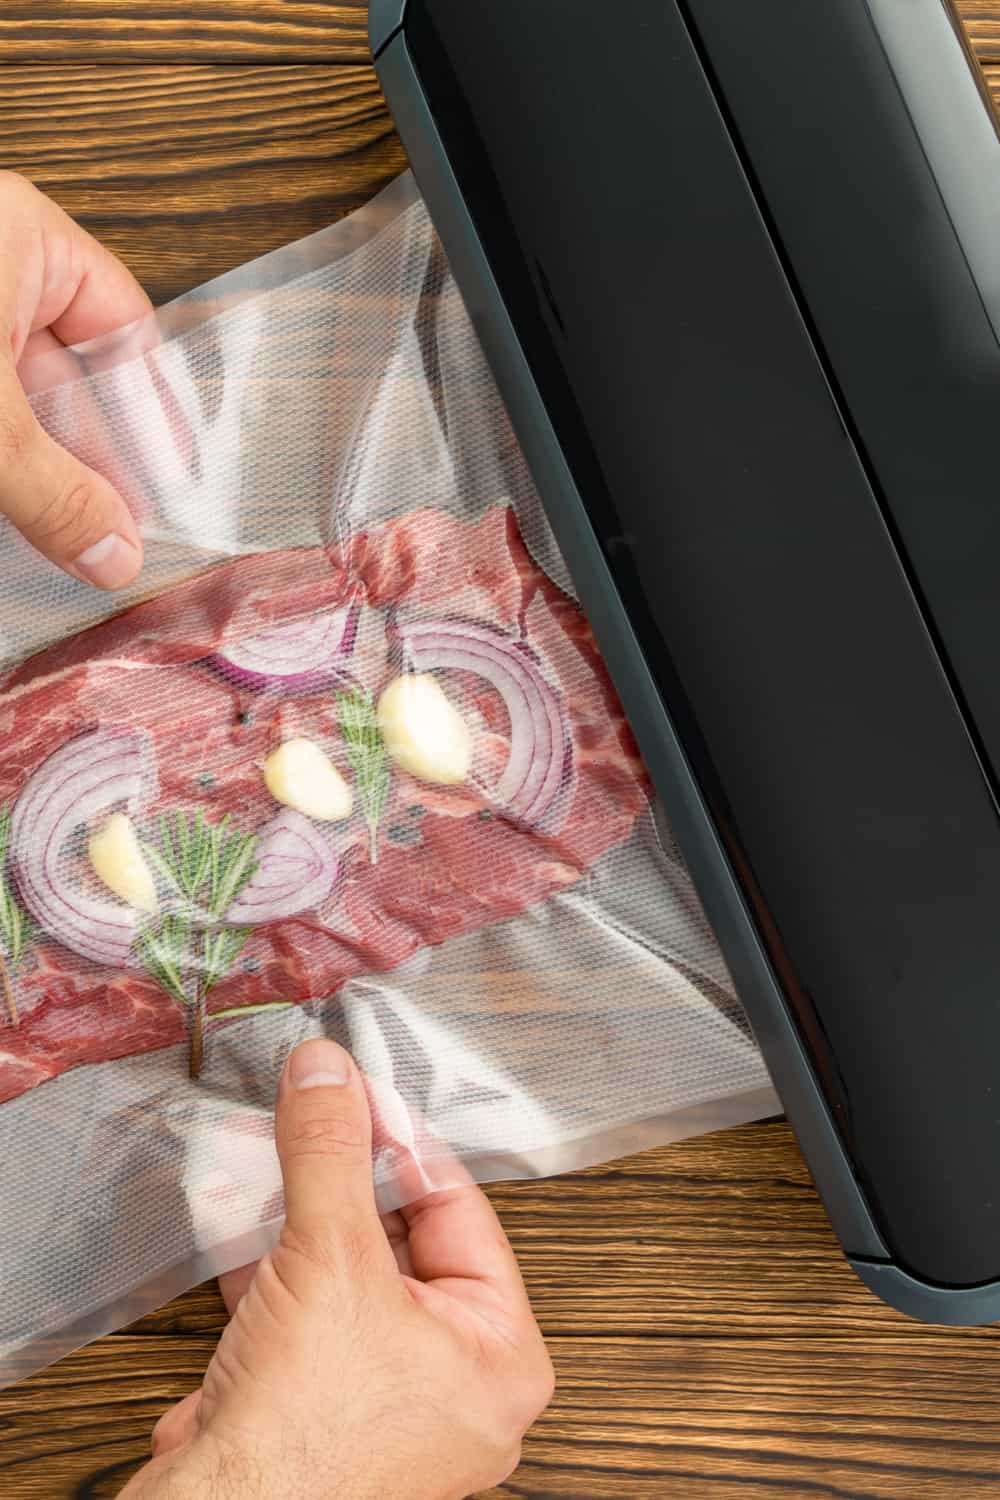 https://www.luckybelly.com/wp-content/uploads/2020/11/17-Homemade-Vacuum-Sealer-Plans-You-Can-DIY-Easily.jpg